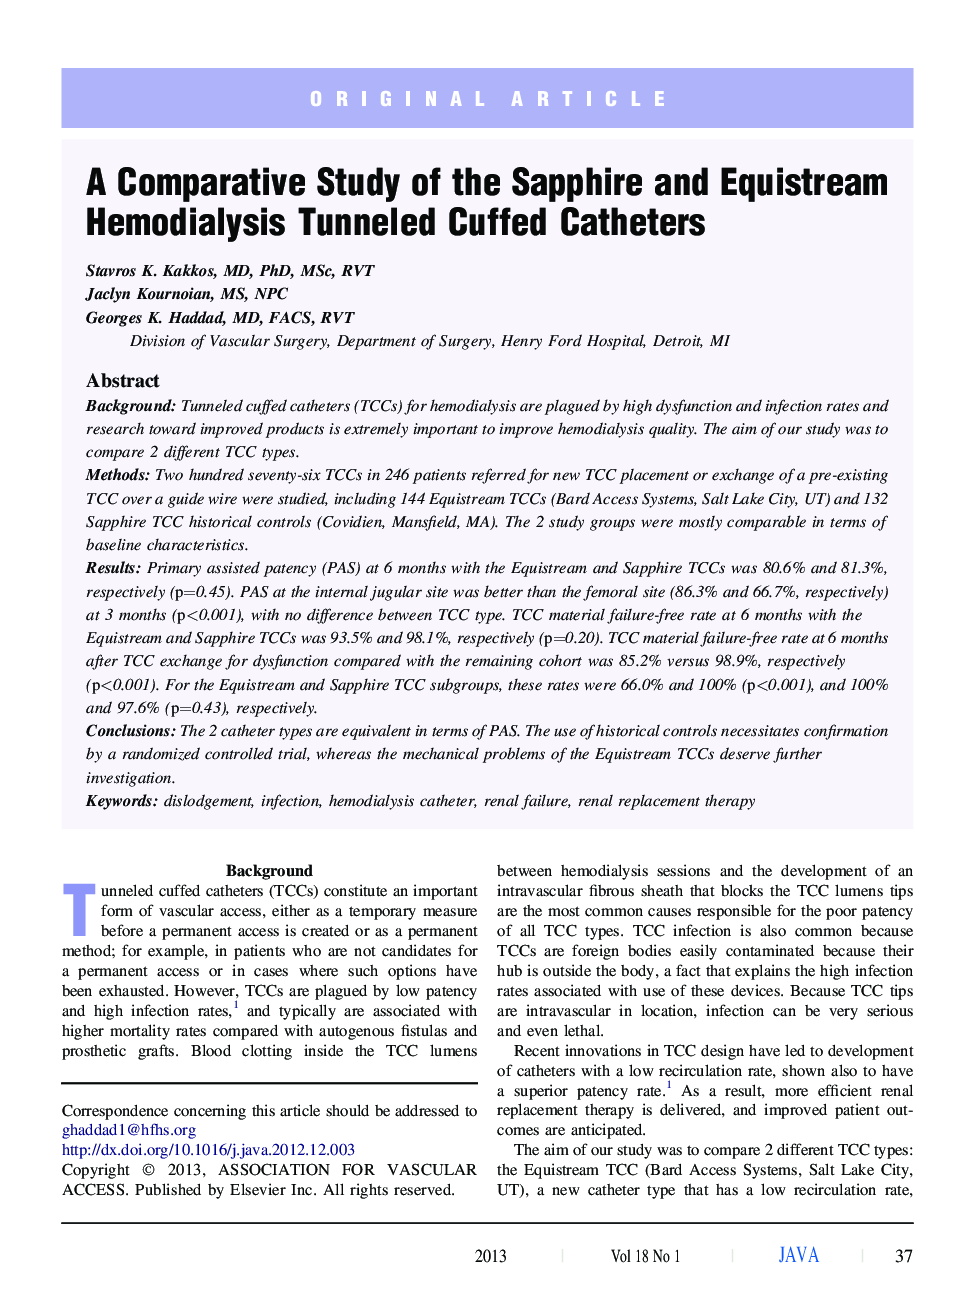 A Comparative Study of the Sapphire and Equistream Hemodialysis Tunneled Cuffed Catheters